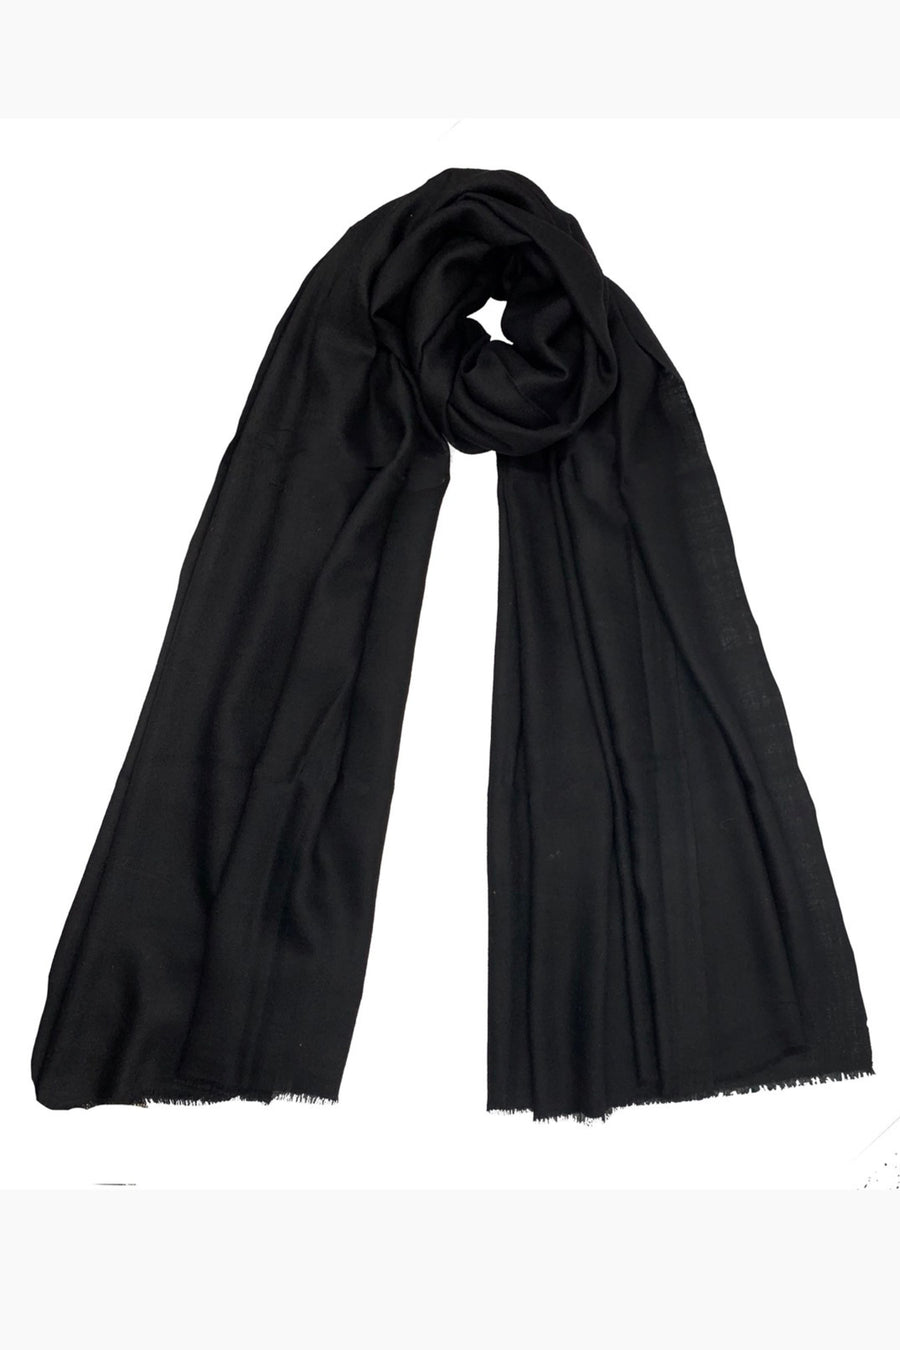 THE HANDSPUN AND HANDWOVEN CASHMERE SCARF | Black